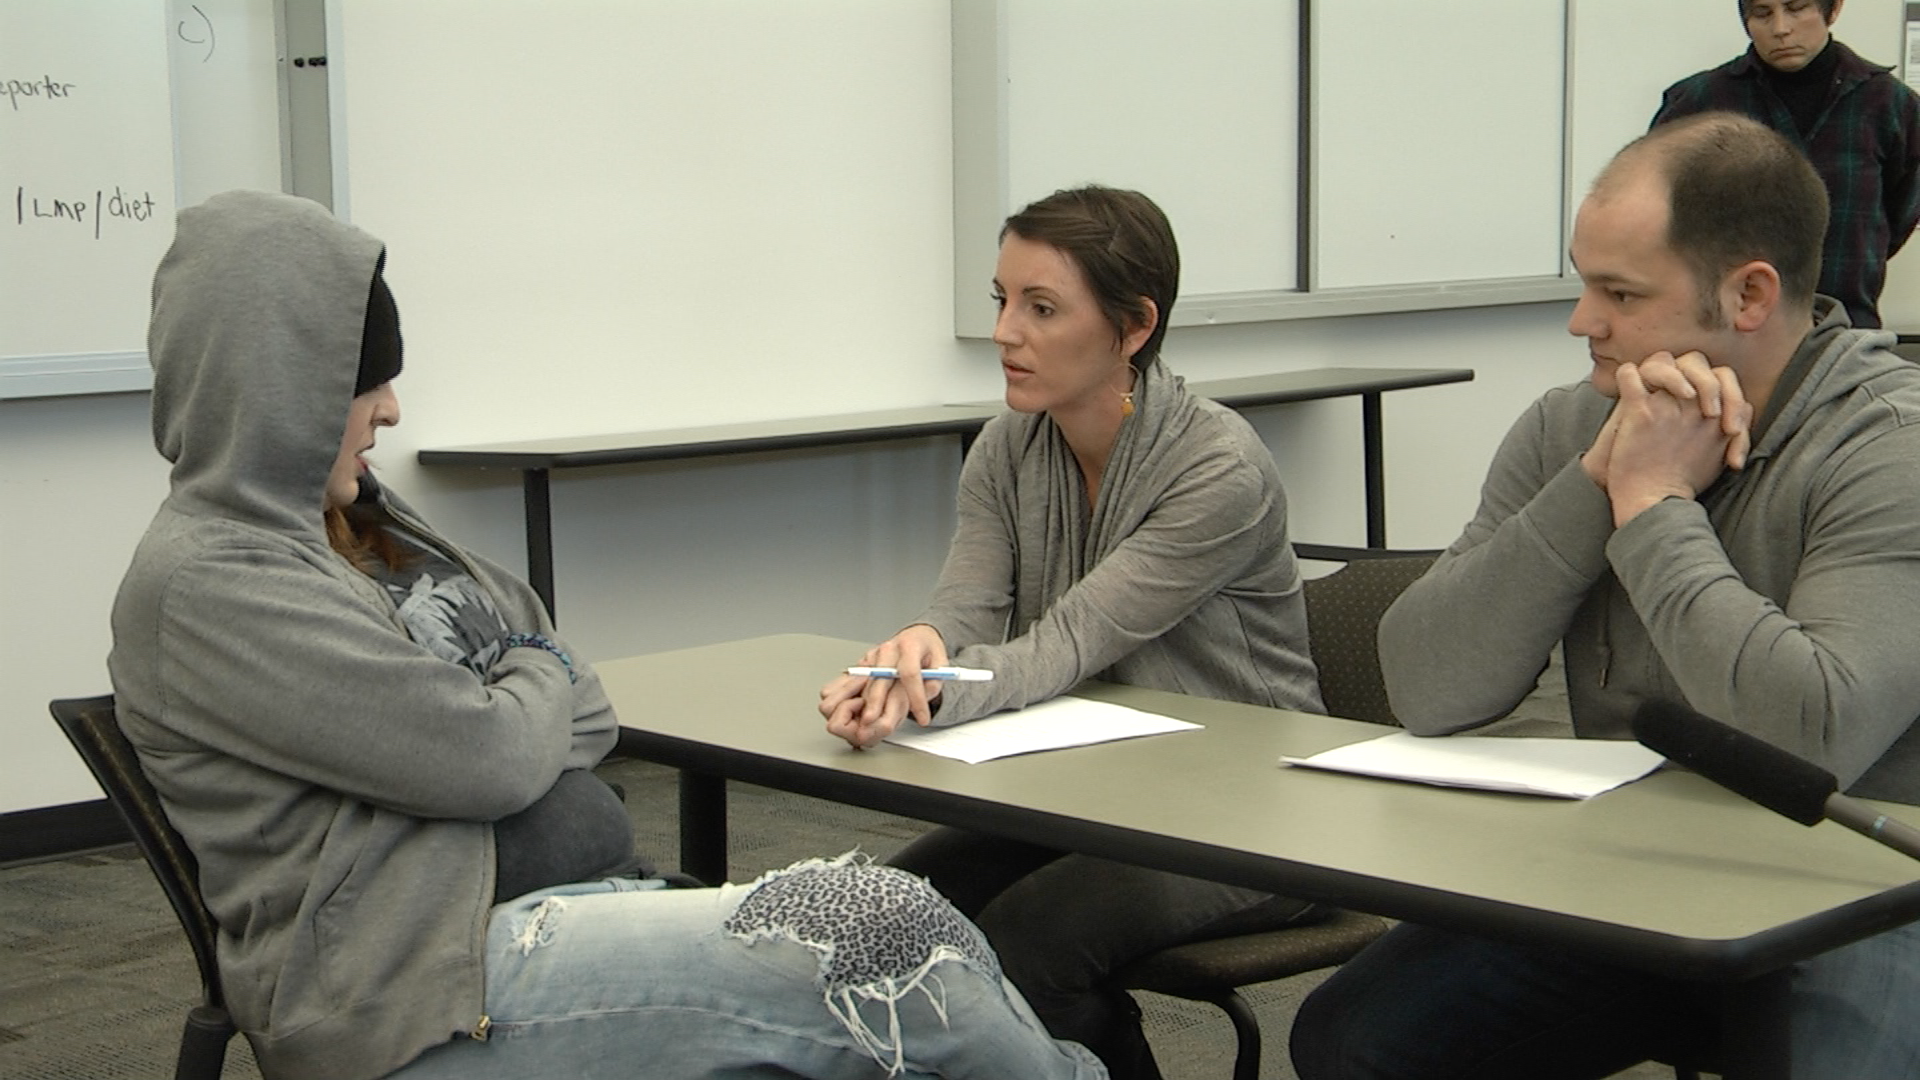 Students speak to an actor as a sullen teen